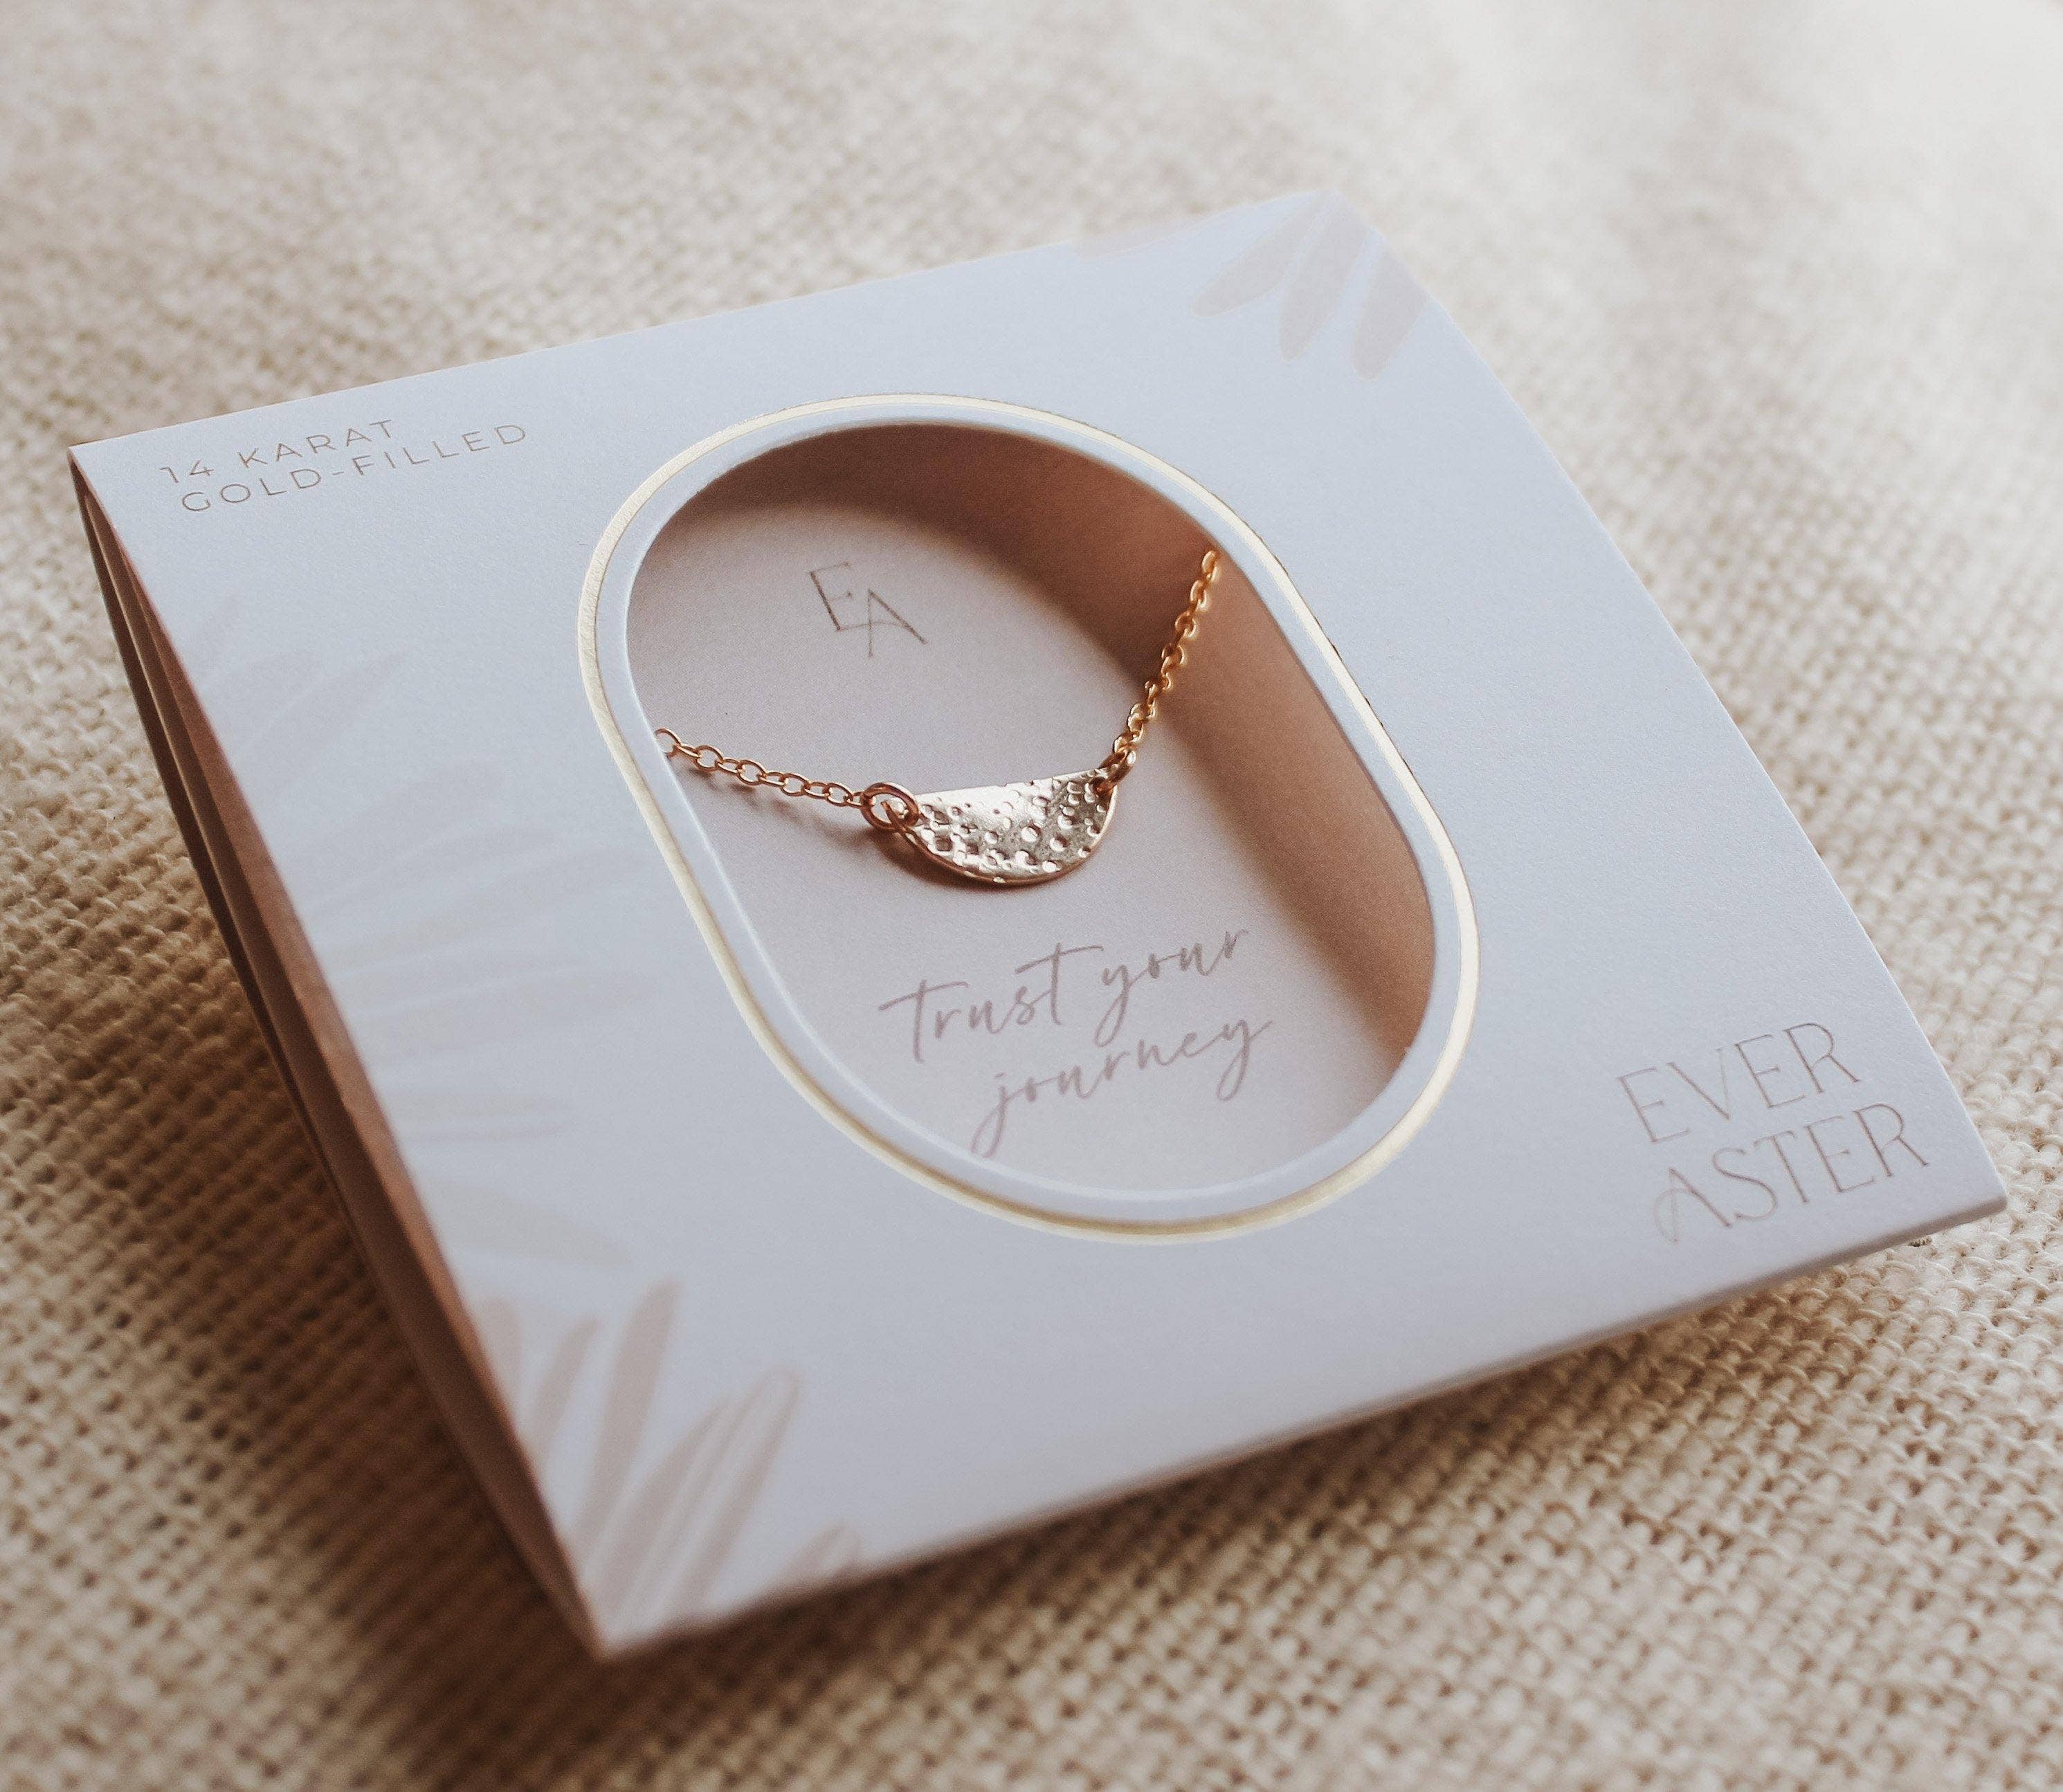 Ever Aster - Trust Your Journey Necklace